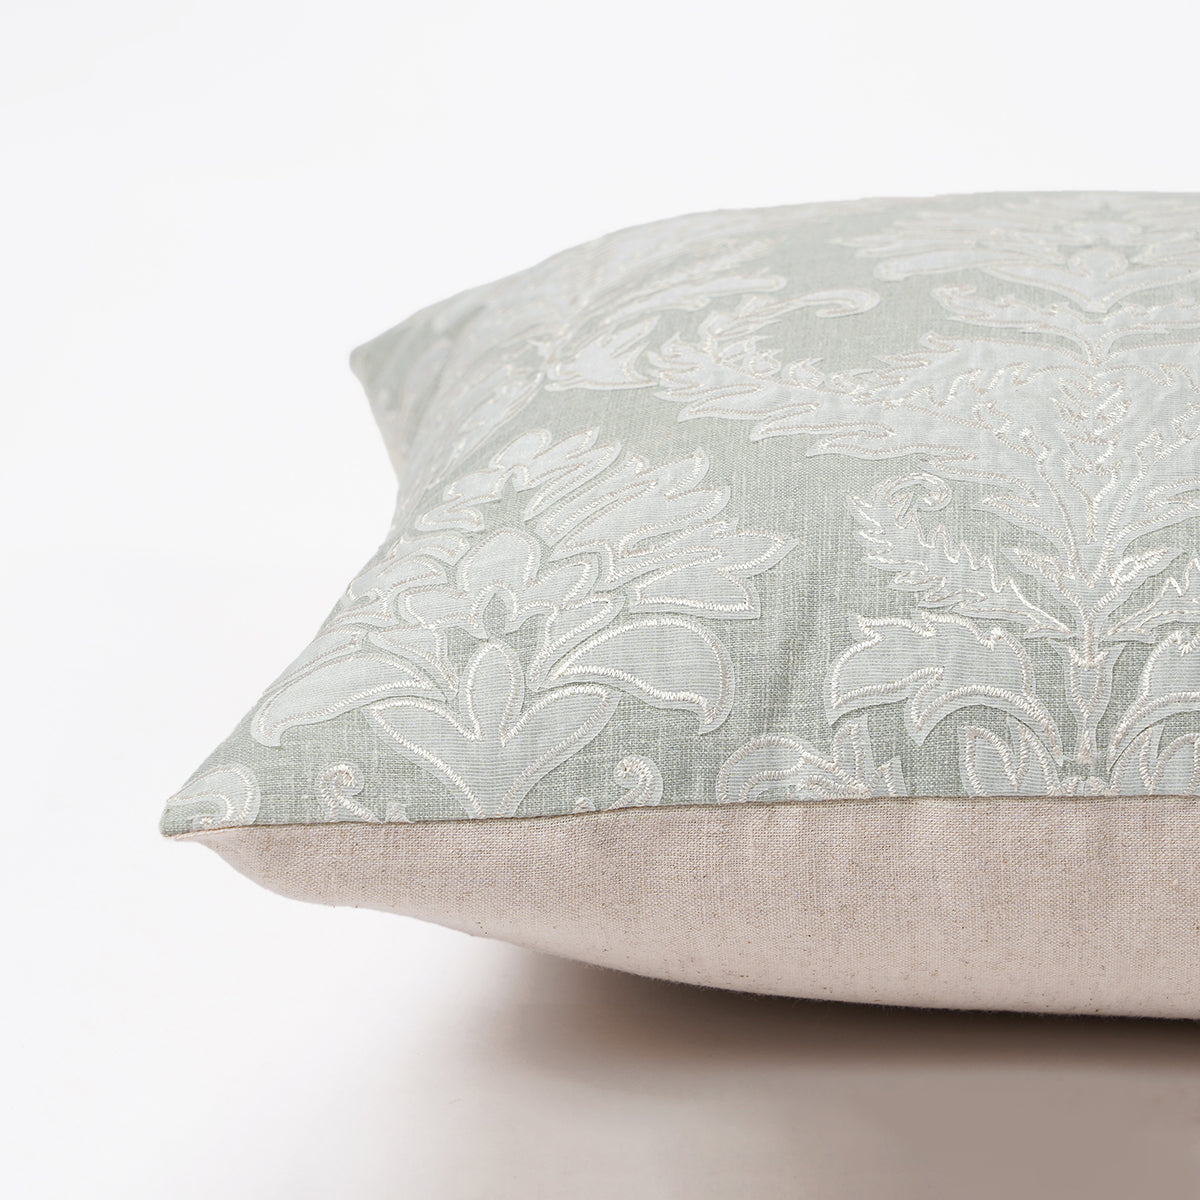 Imperial - Sage Green Damask pattern applique and Embroidery pillow cover, Linen blend fabric, available in 16X16 inches, custom sizes on request